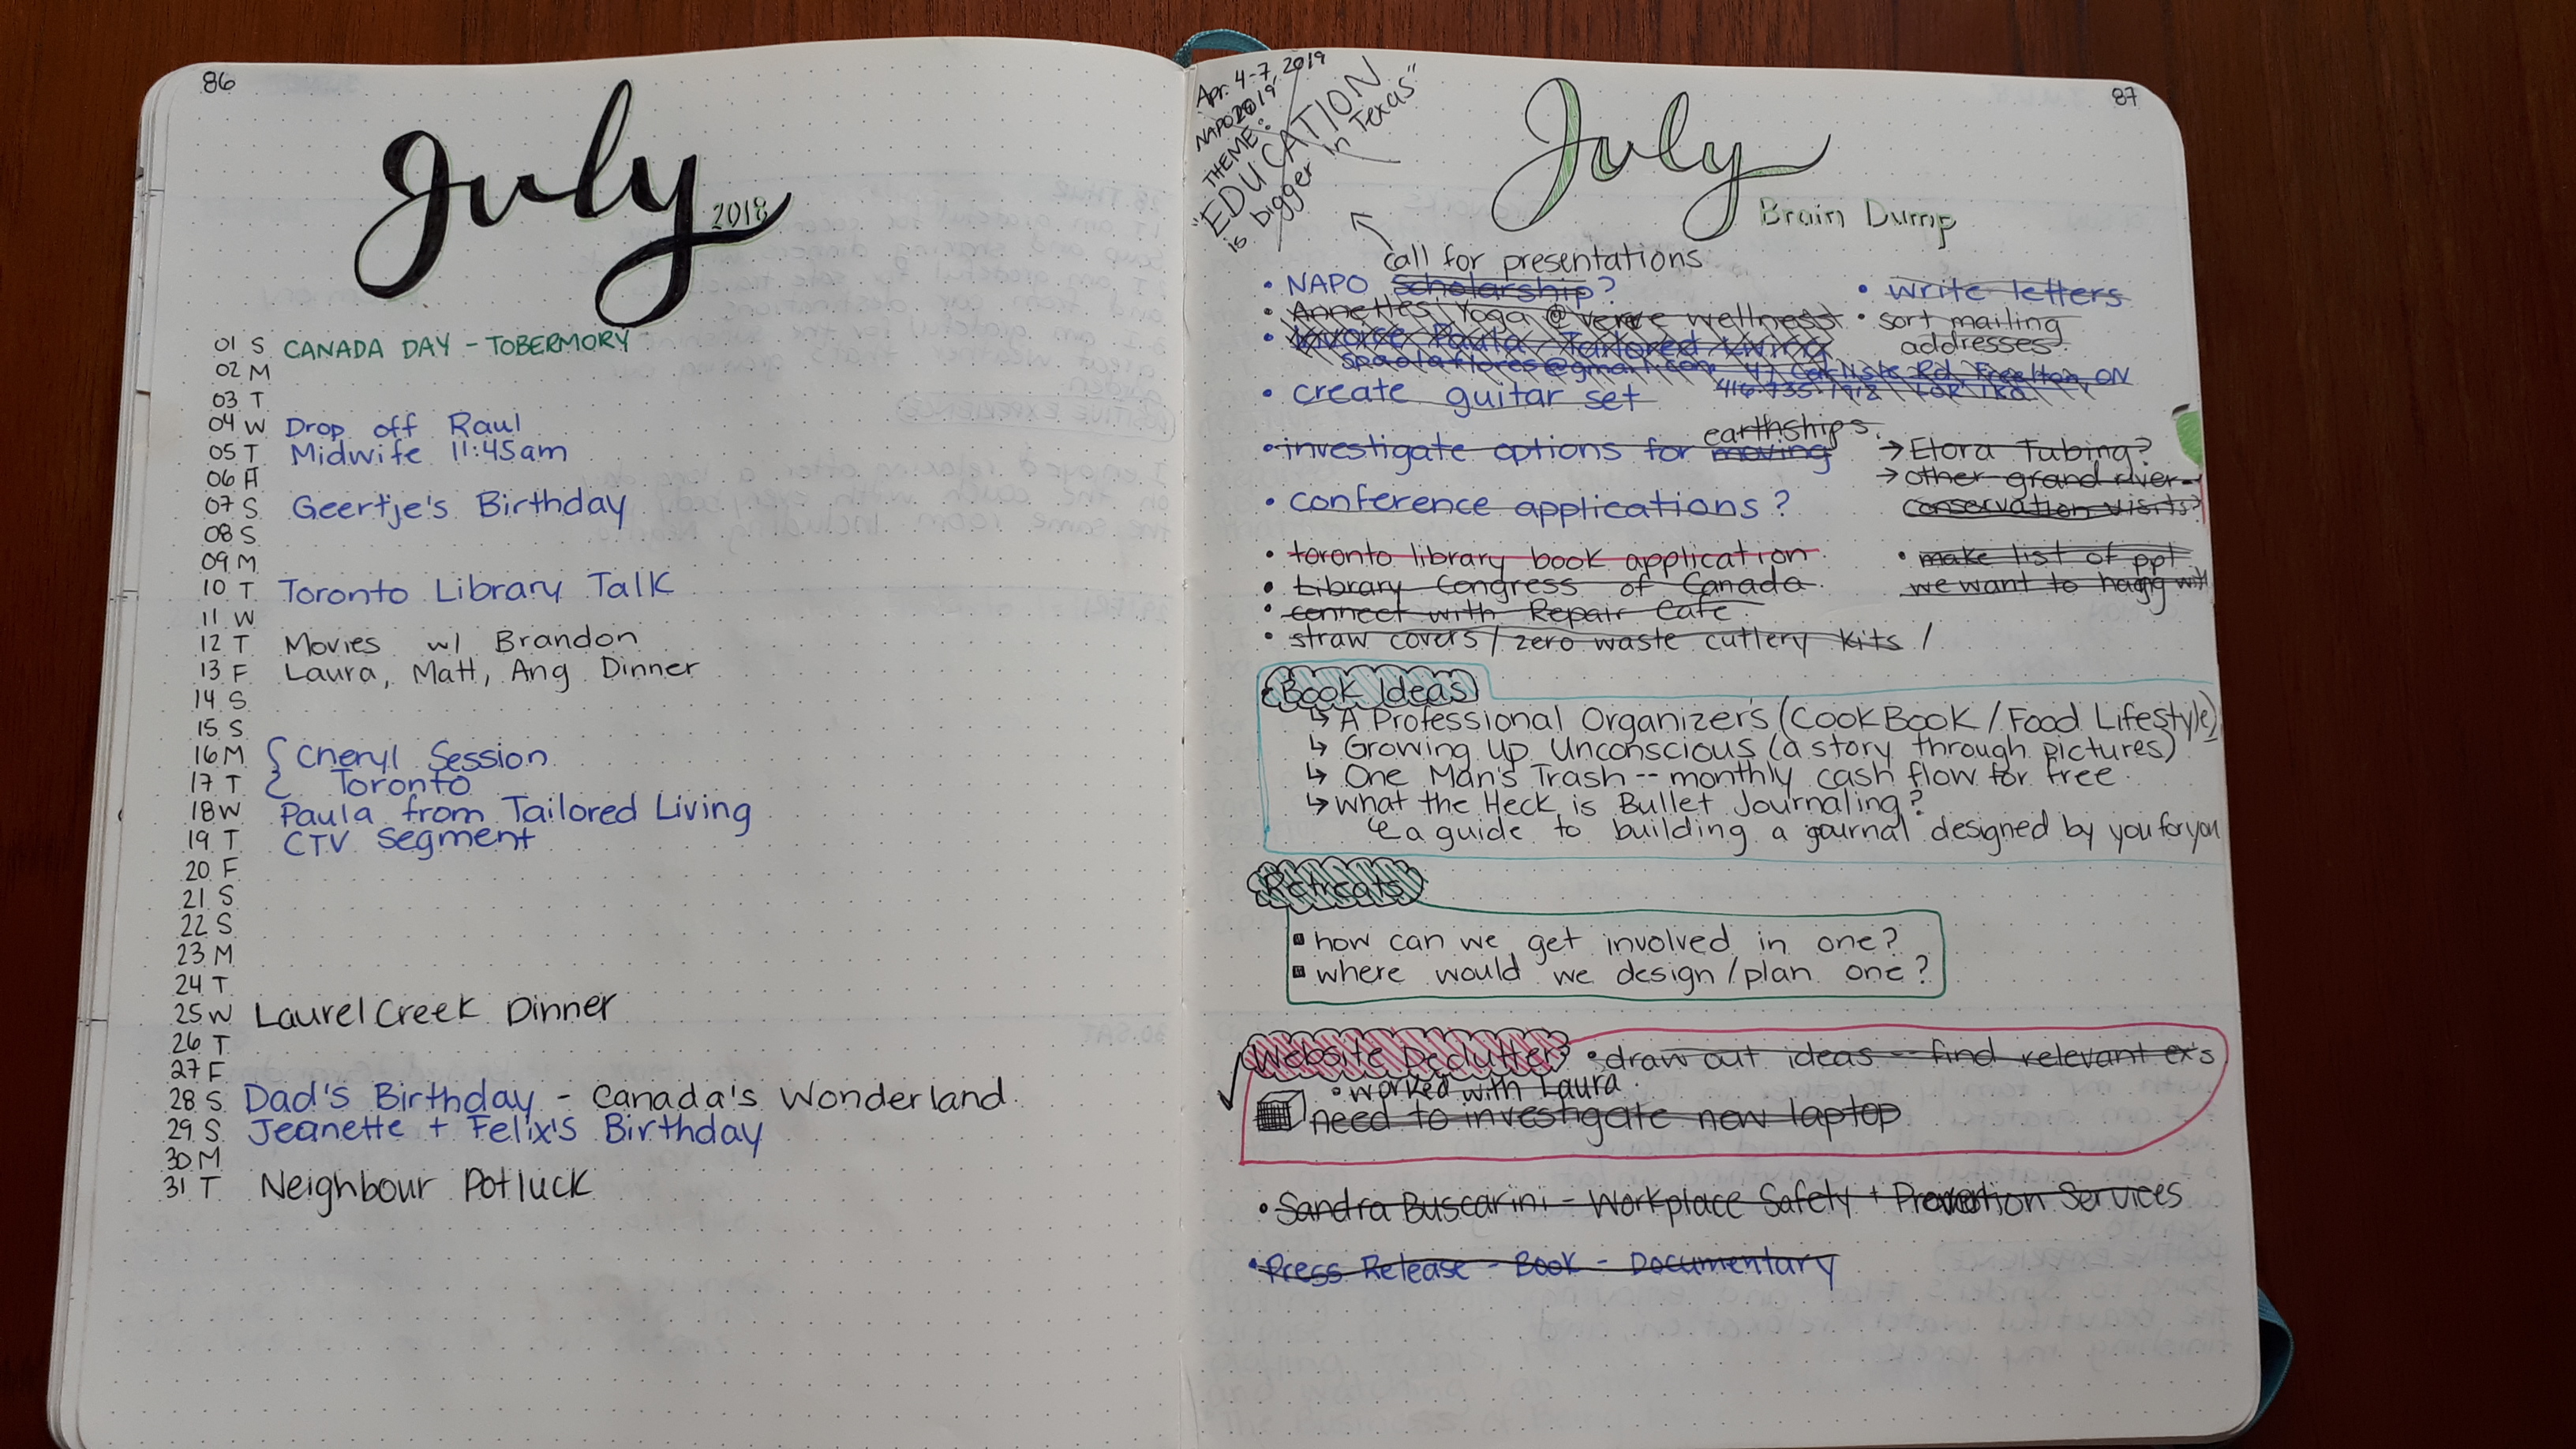 Month At A Glance - KW Professional Organizers - Bullet Journal Sample